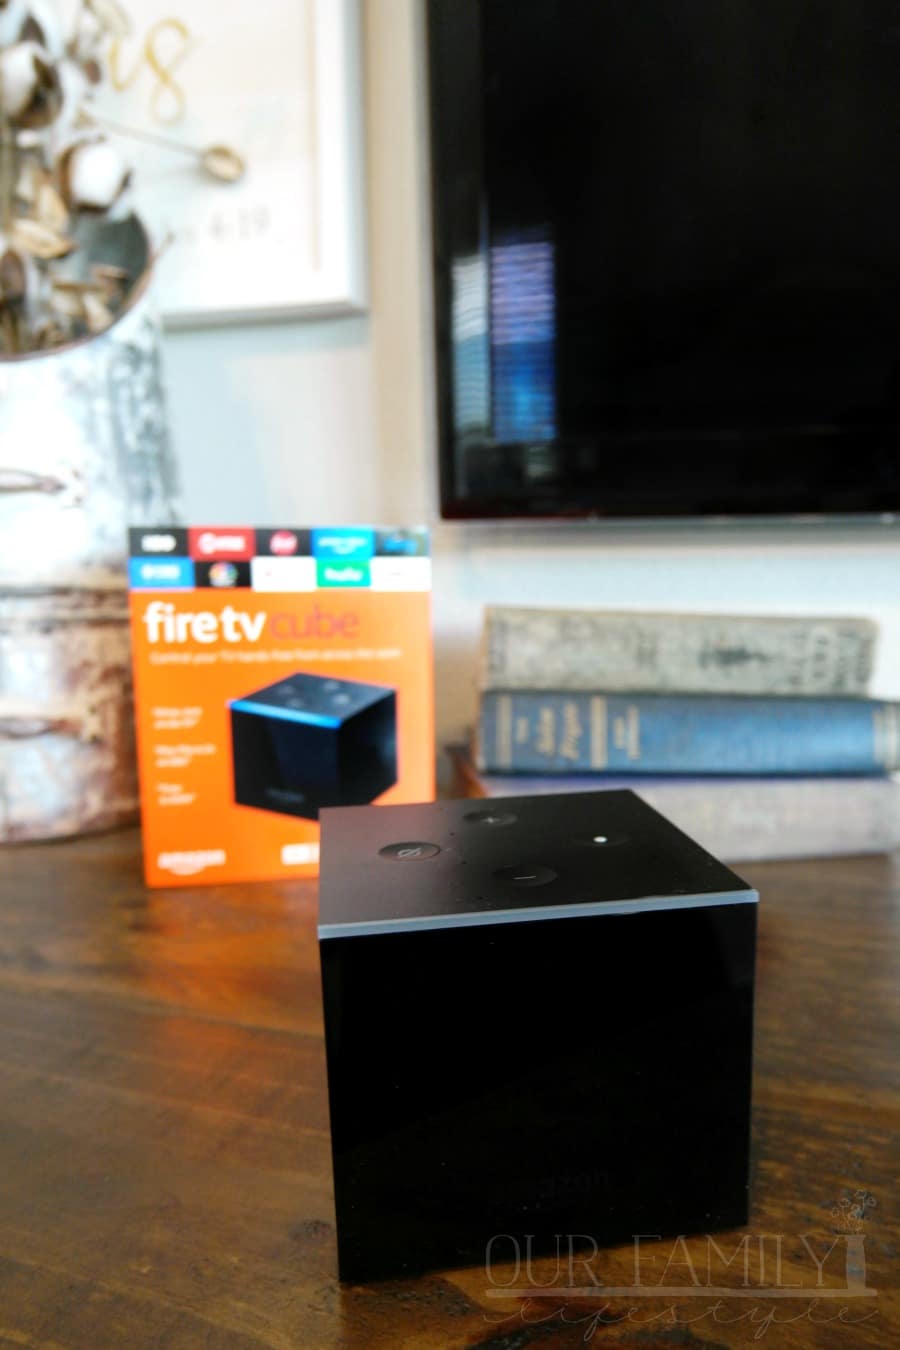 Amazon Fire TV Cube from Best Buy